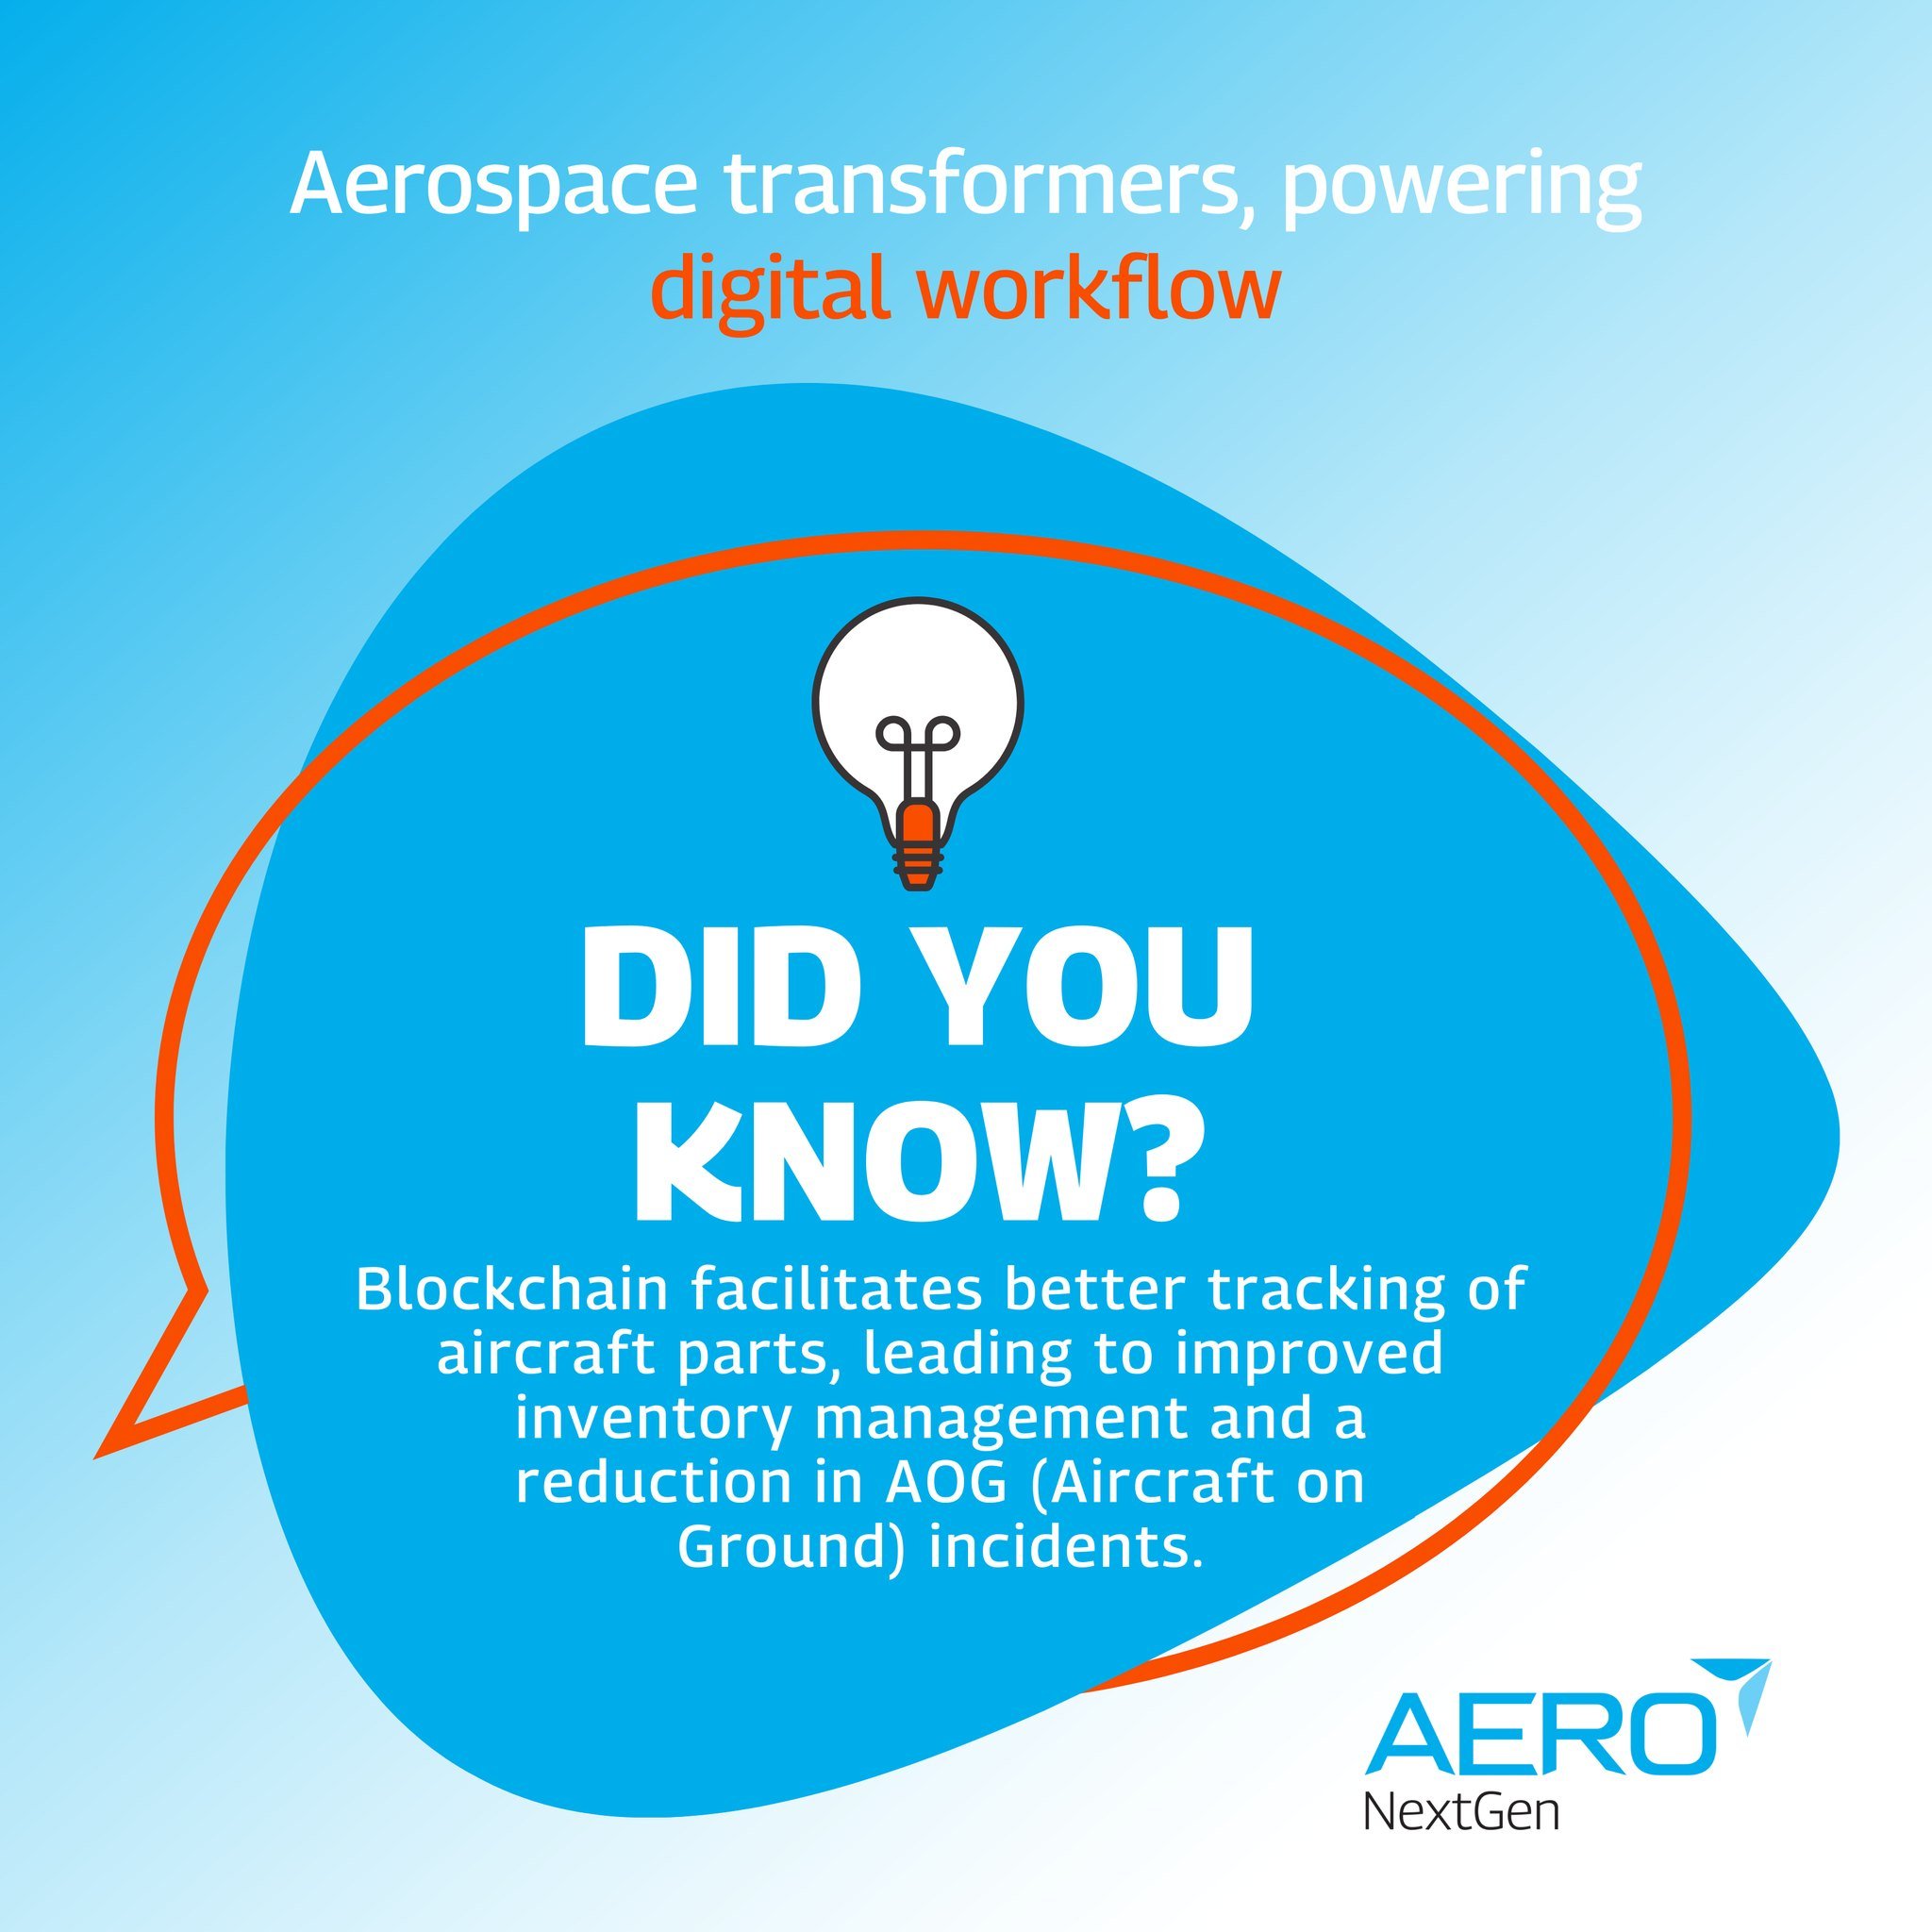 DID YOU KNOW | Blockchain Revolutionizing Aircraft Part Tracking ✈️🔗

Did you know that blockchain technology is setting a new standard in aviation maintenance? By facilitating better tracking of aircraft parts, blockchain is drastically improving i